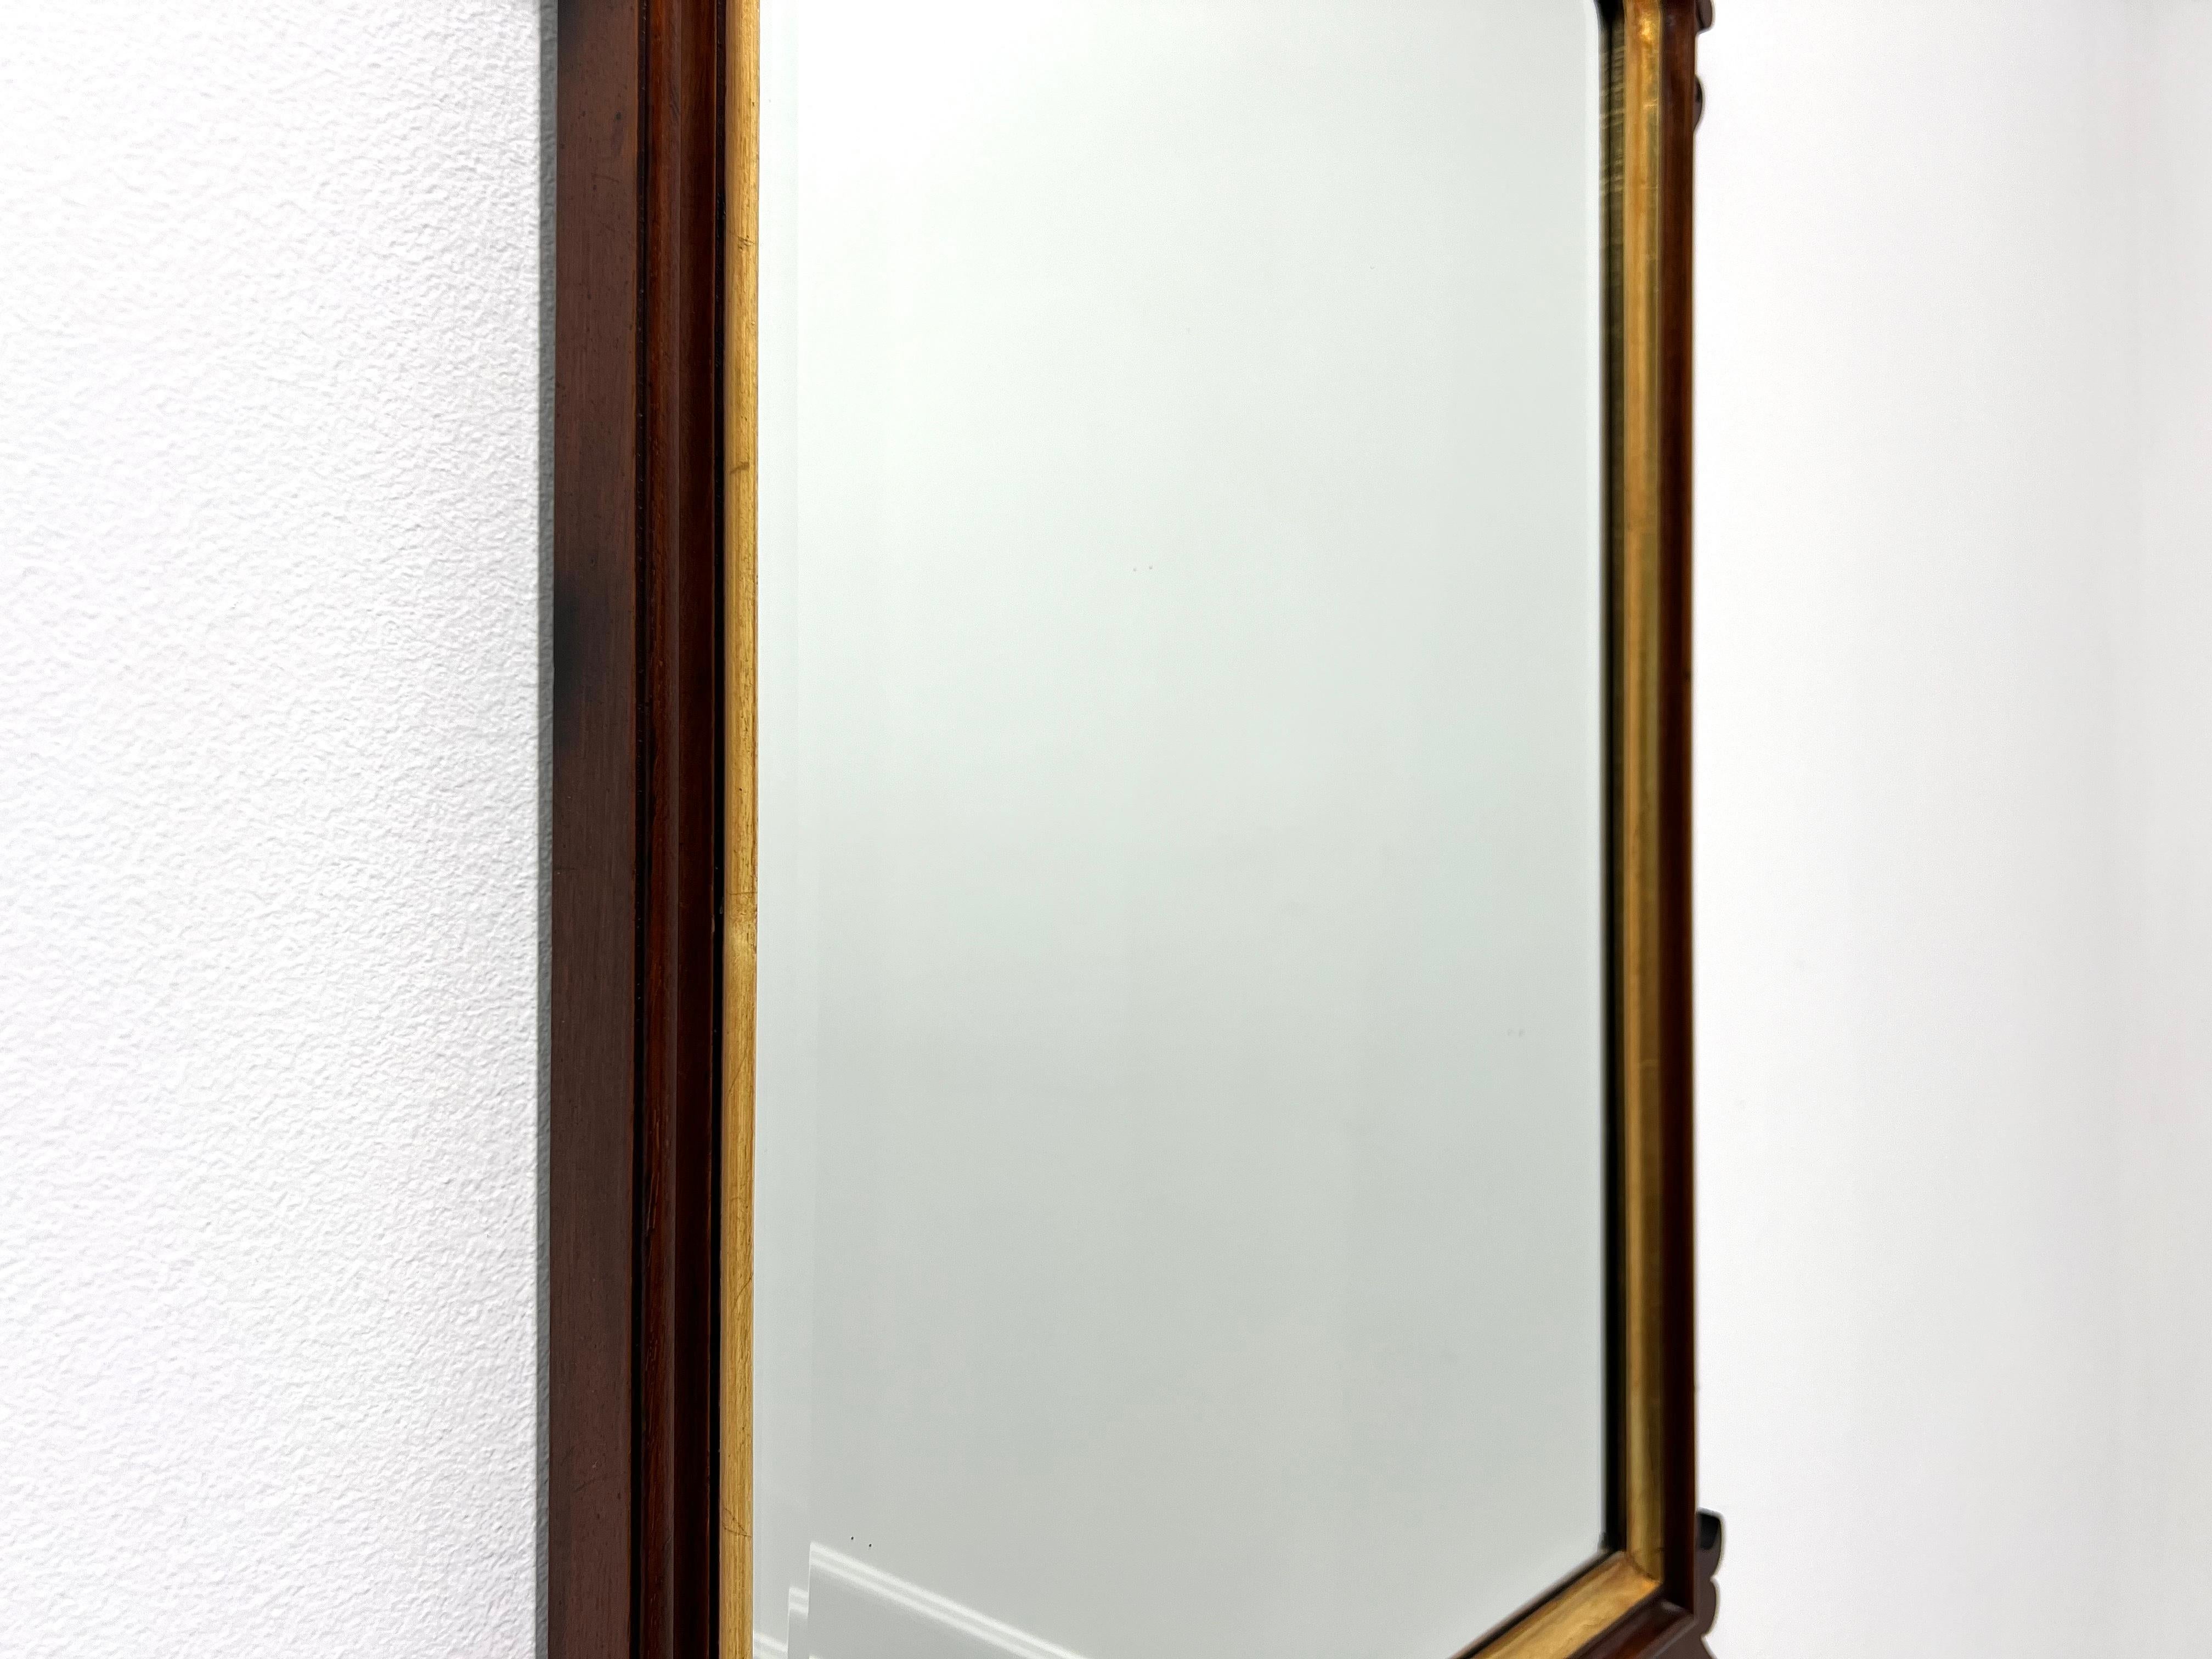 Late 20th Century Mahogany Chippendale Beveled Wall Mirror In Good Condition For Sale In Charlotte, NC